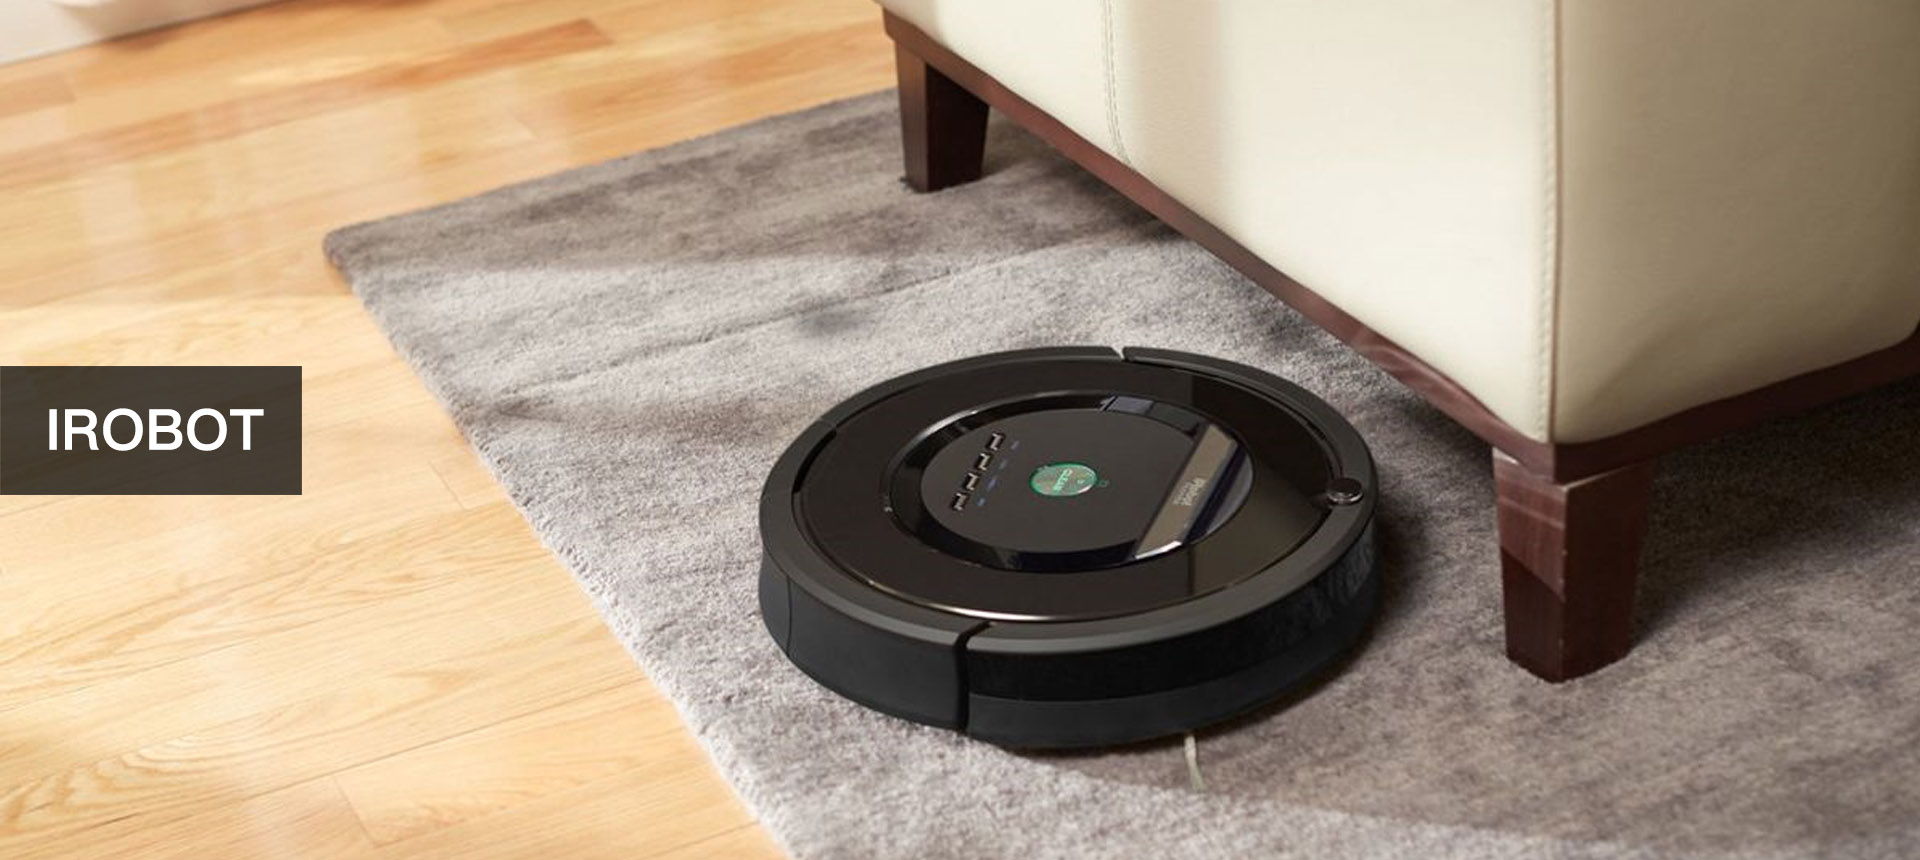 Irobot Robot Vacuum Reviews 2021 Which, Which Roomba Is The Best For Hardwood Floors